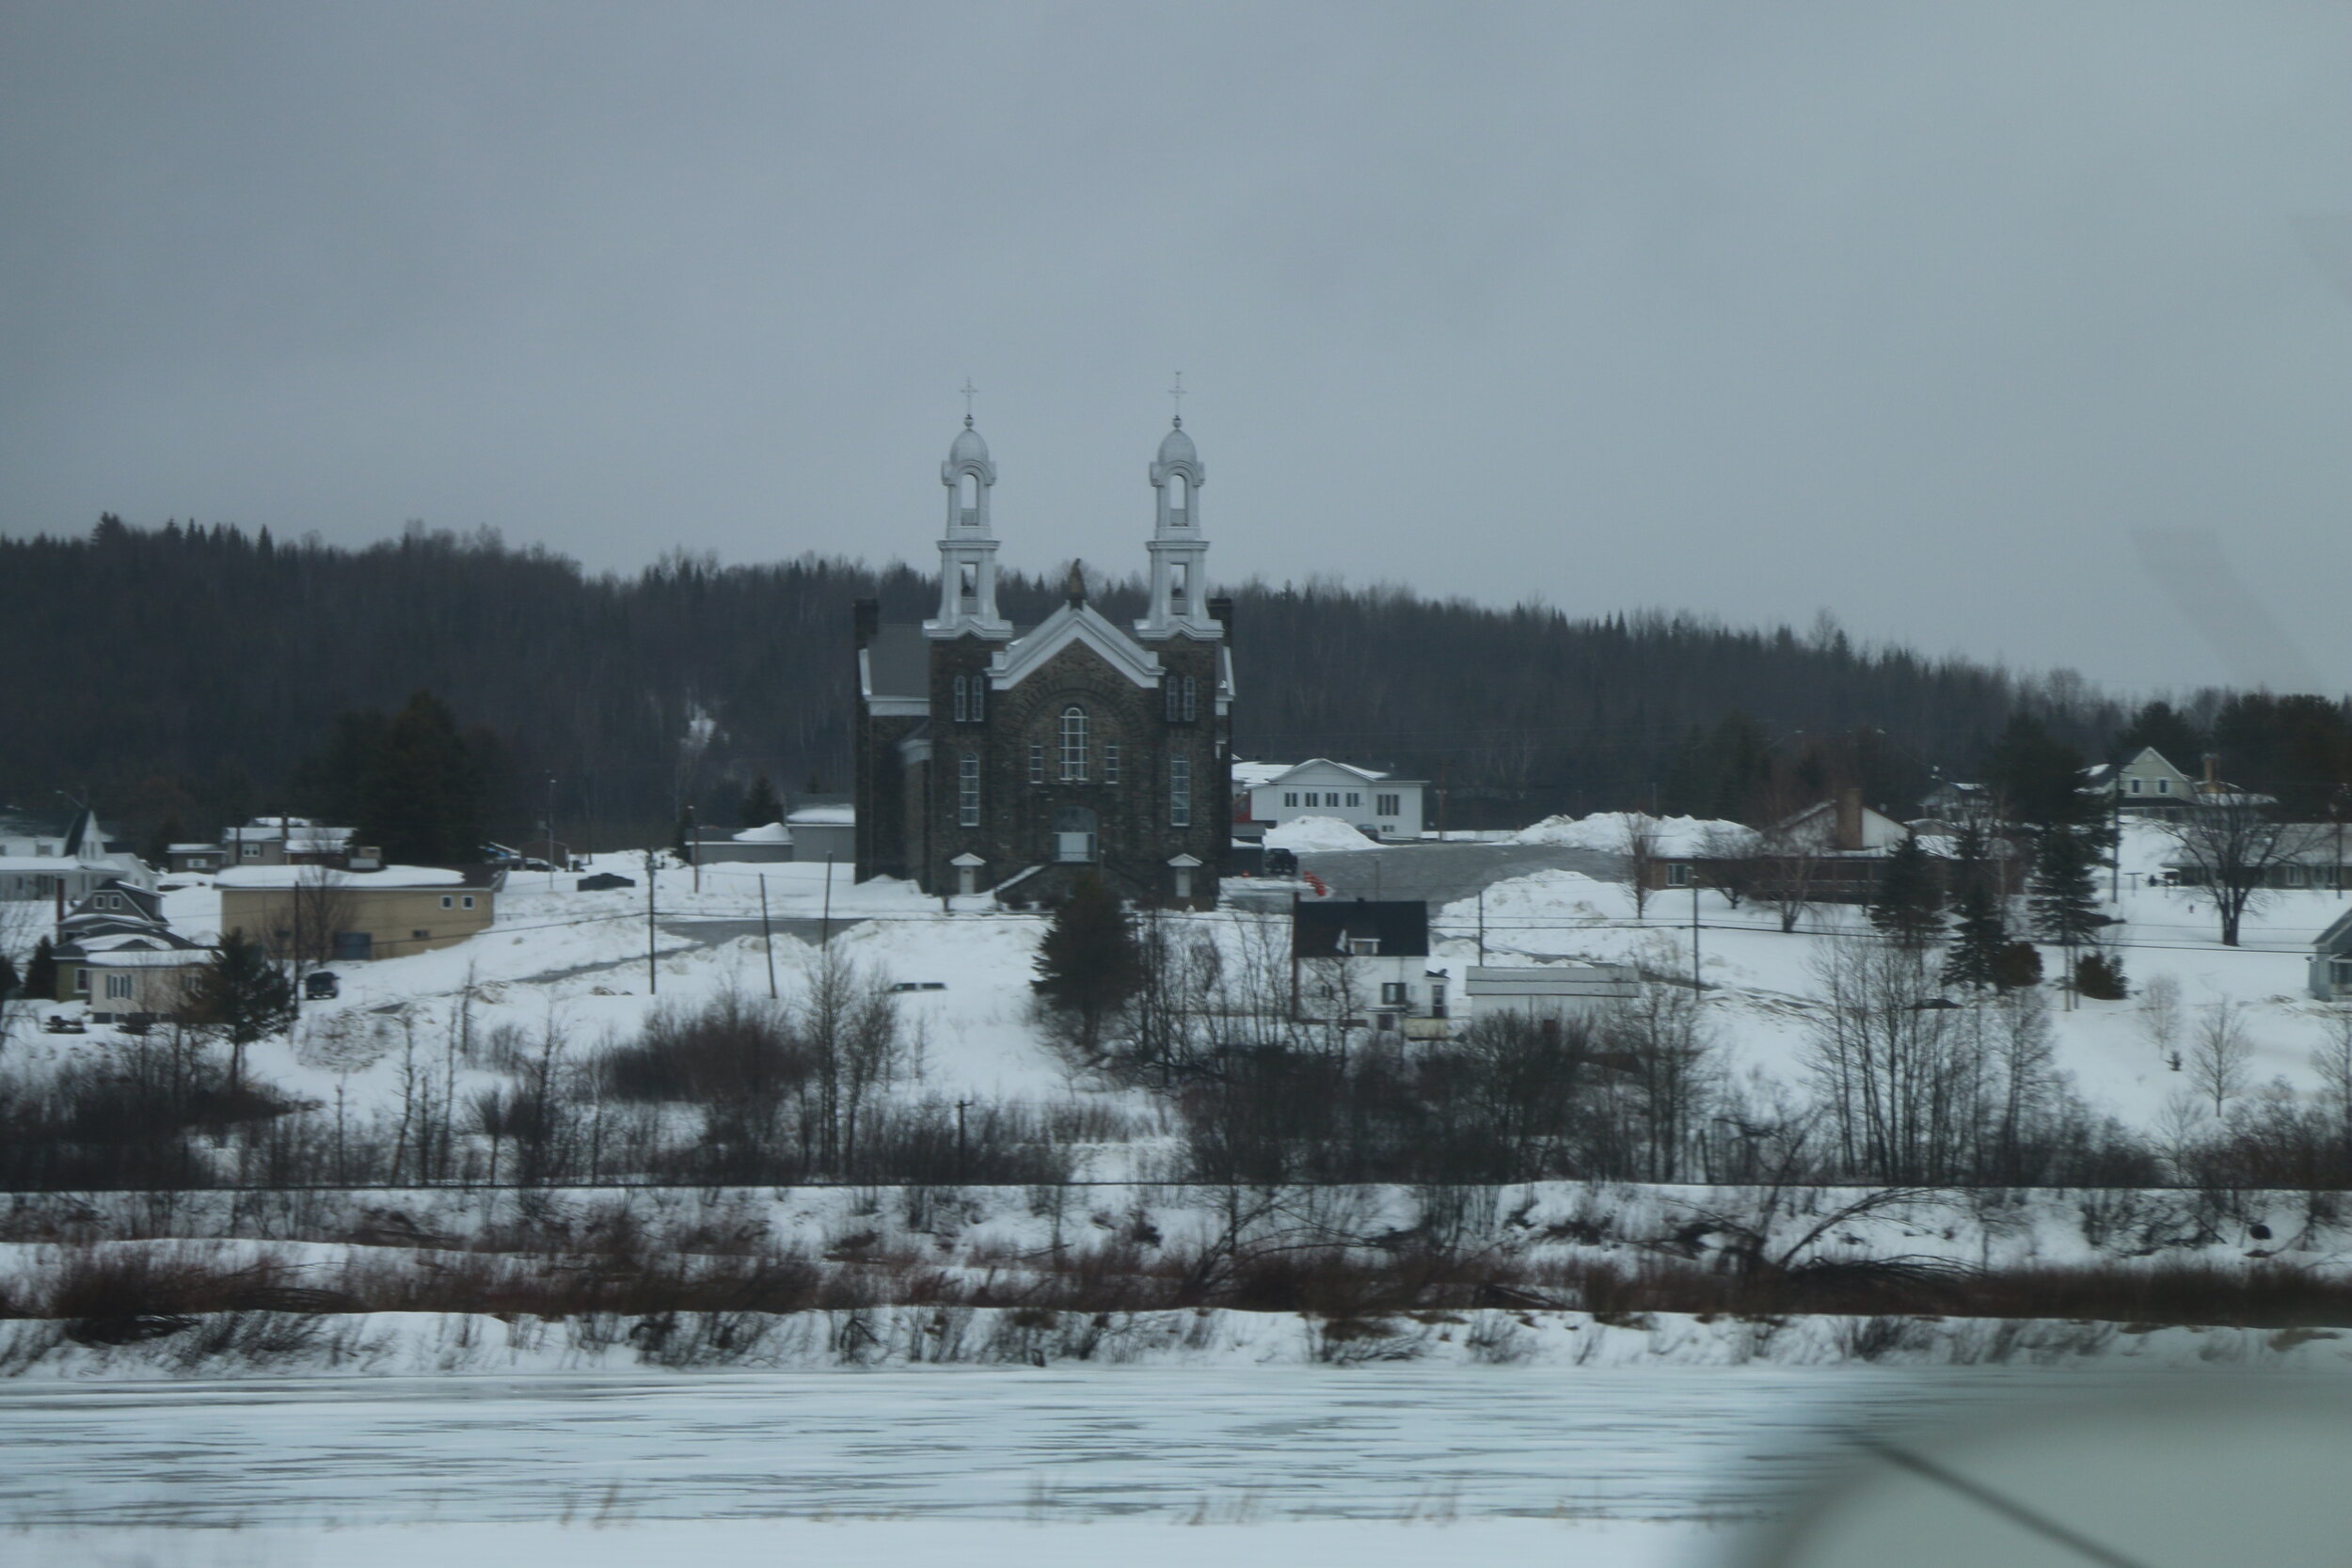   A view of a church in Canada from across the St. Johns.  